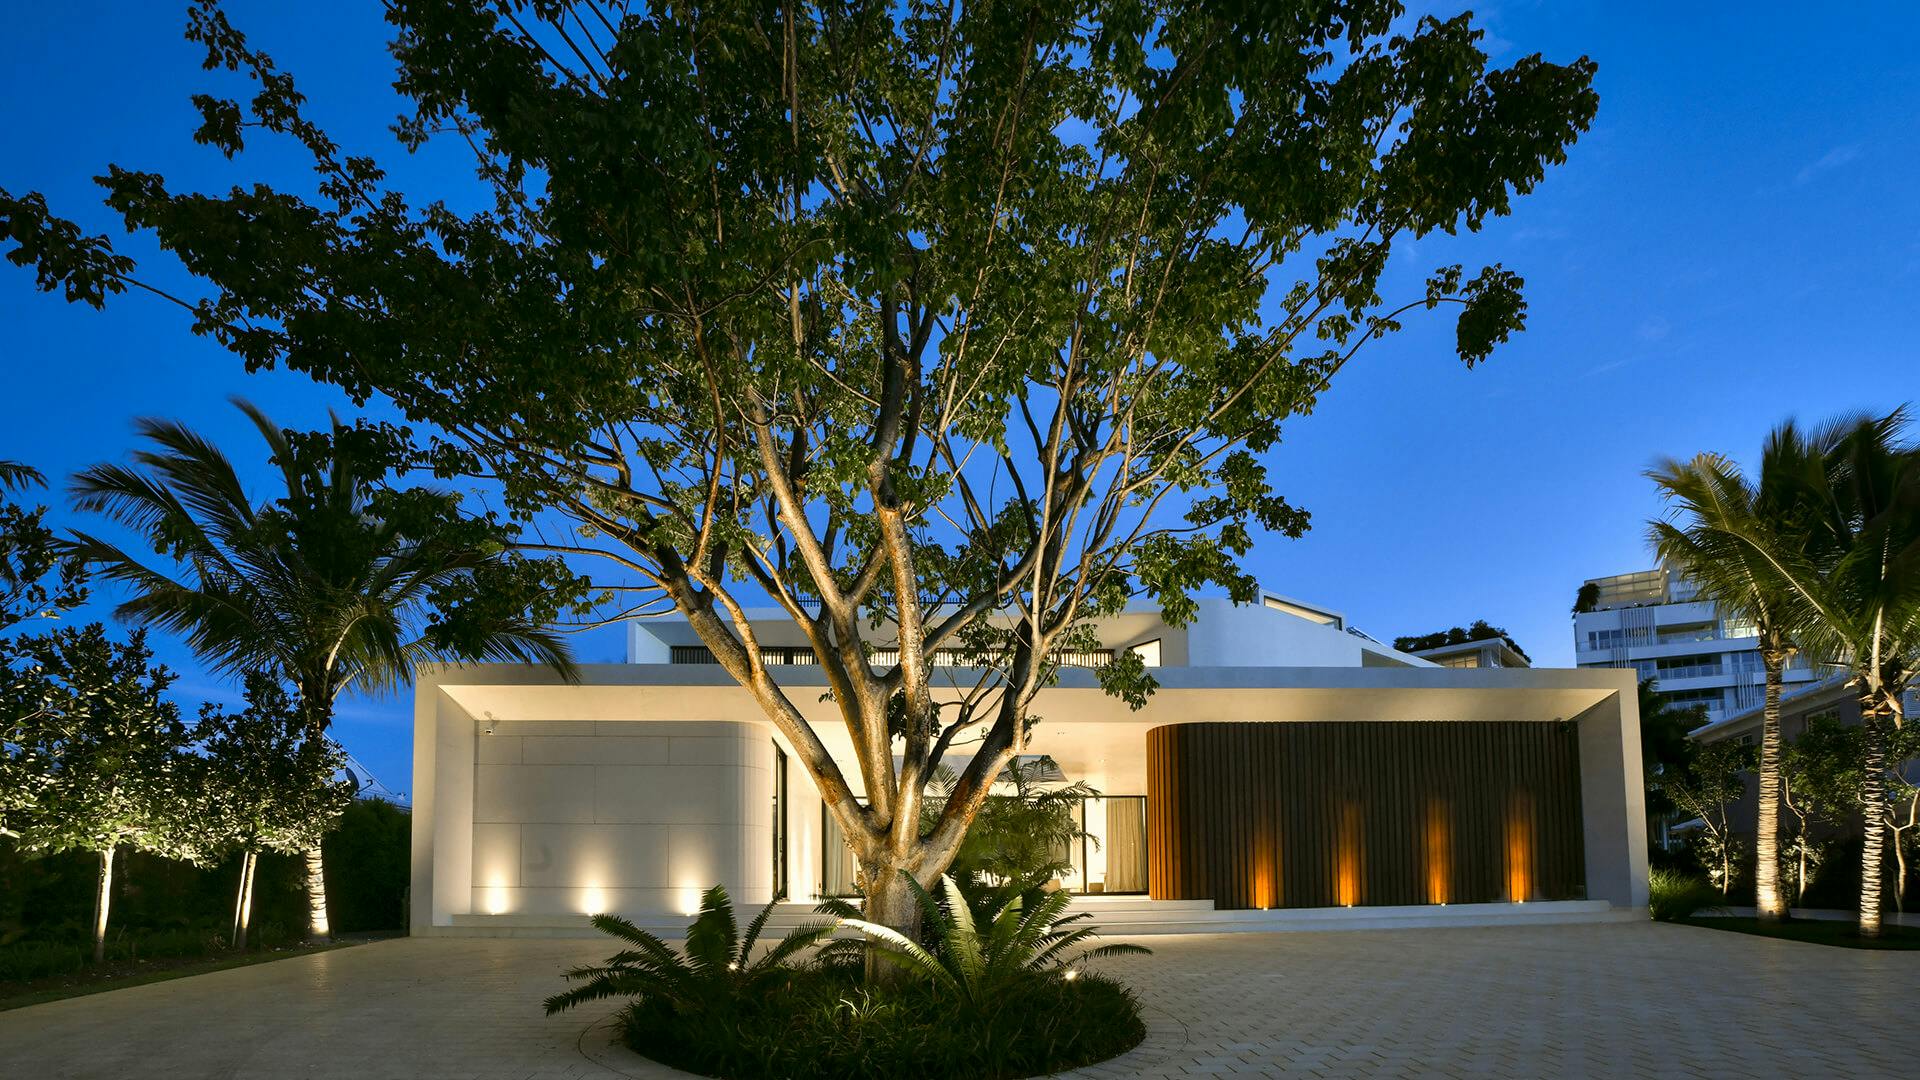 House exterior at dusk with center tree lit by landscape lighting 